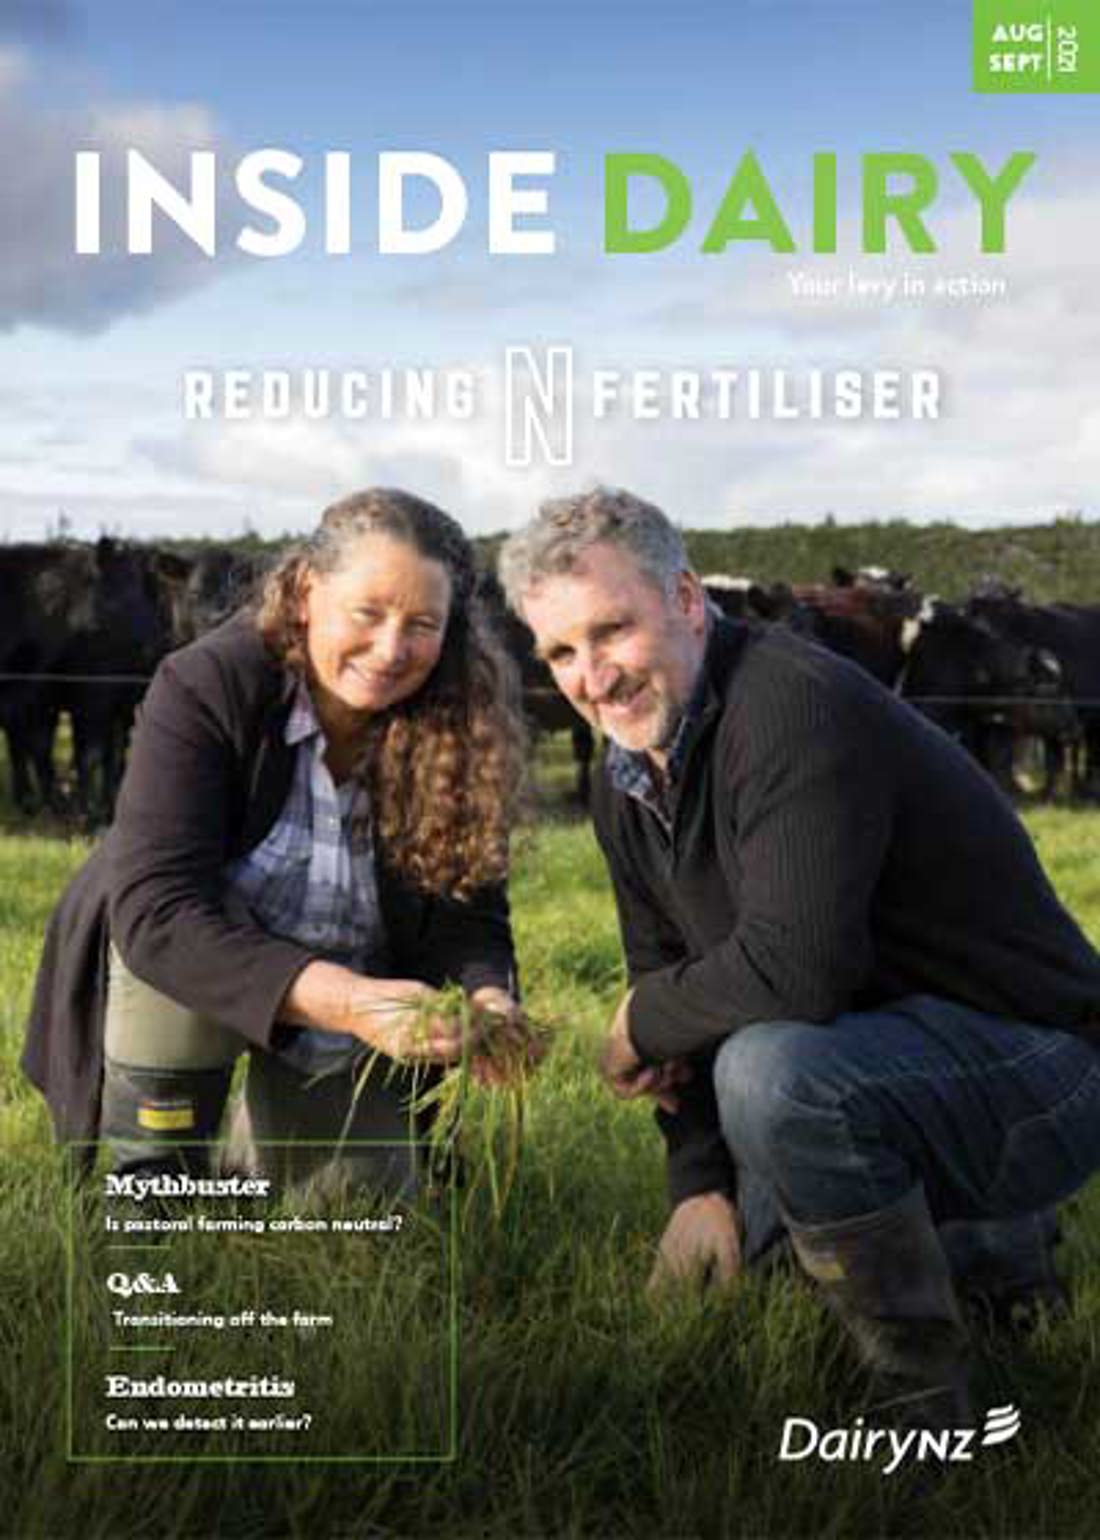 Inside Dairy August Sept 2021 Image